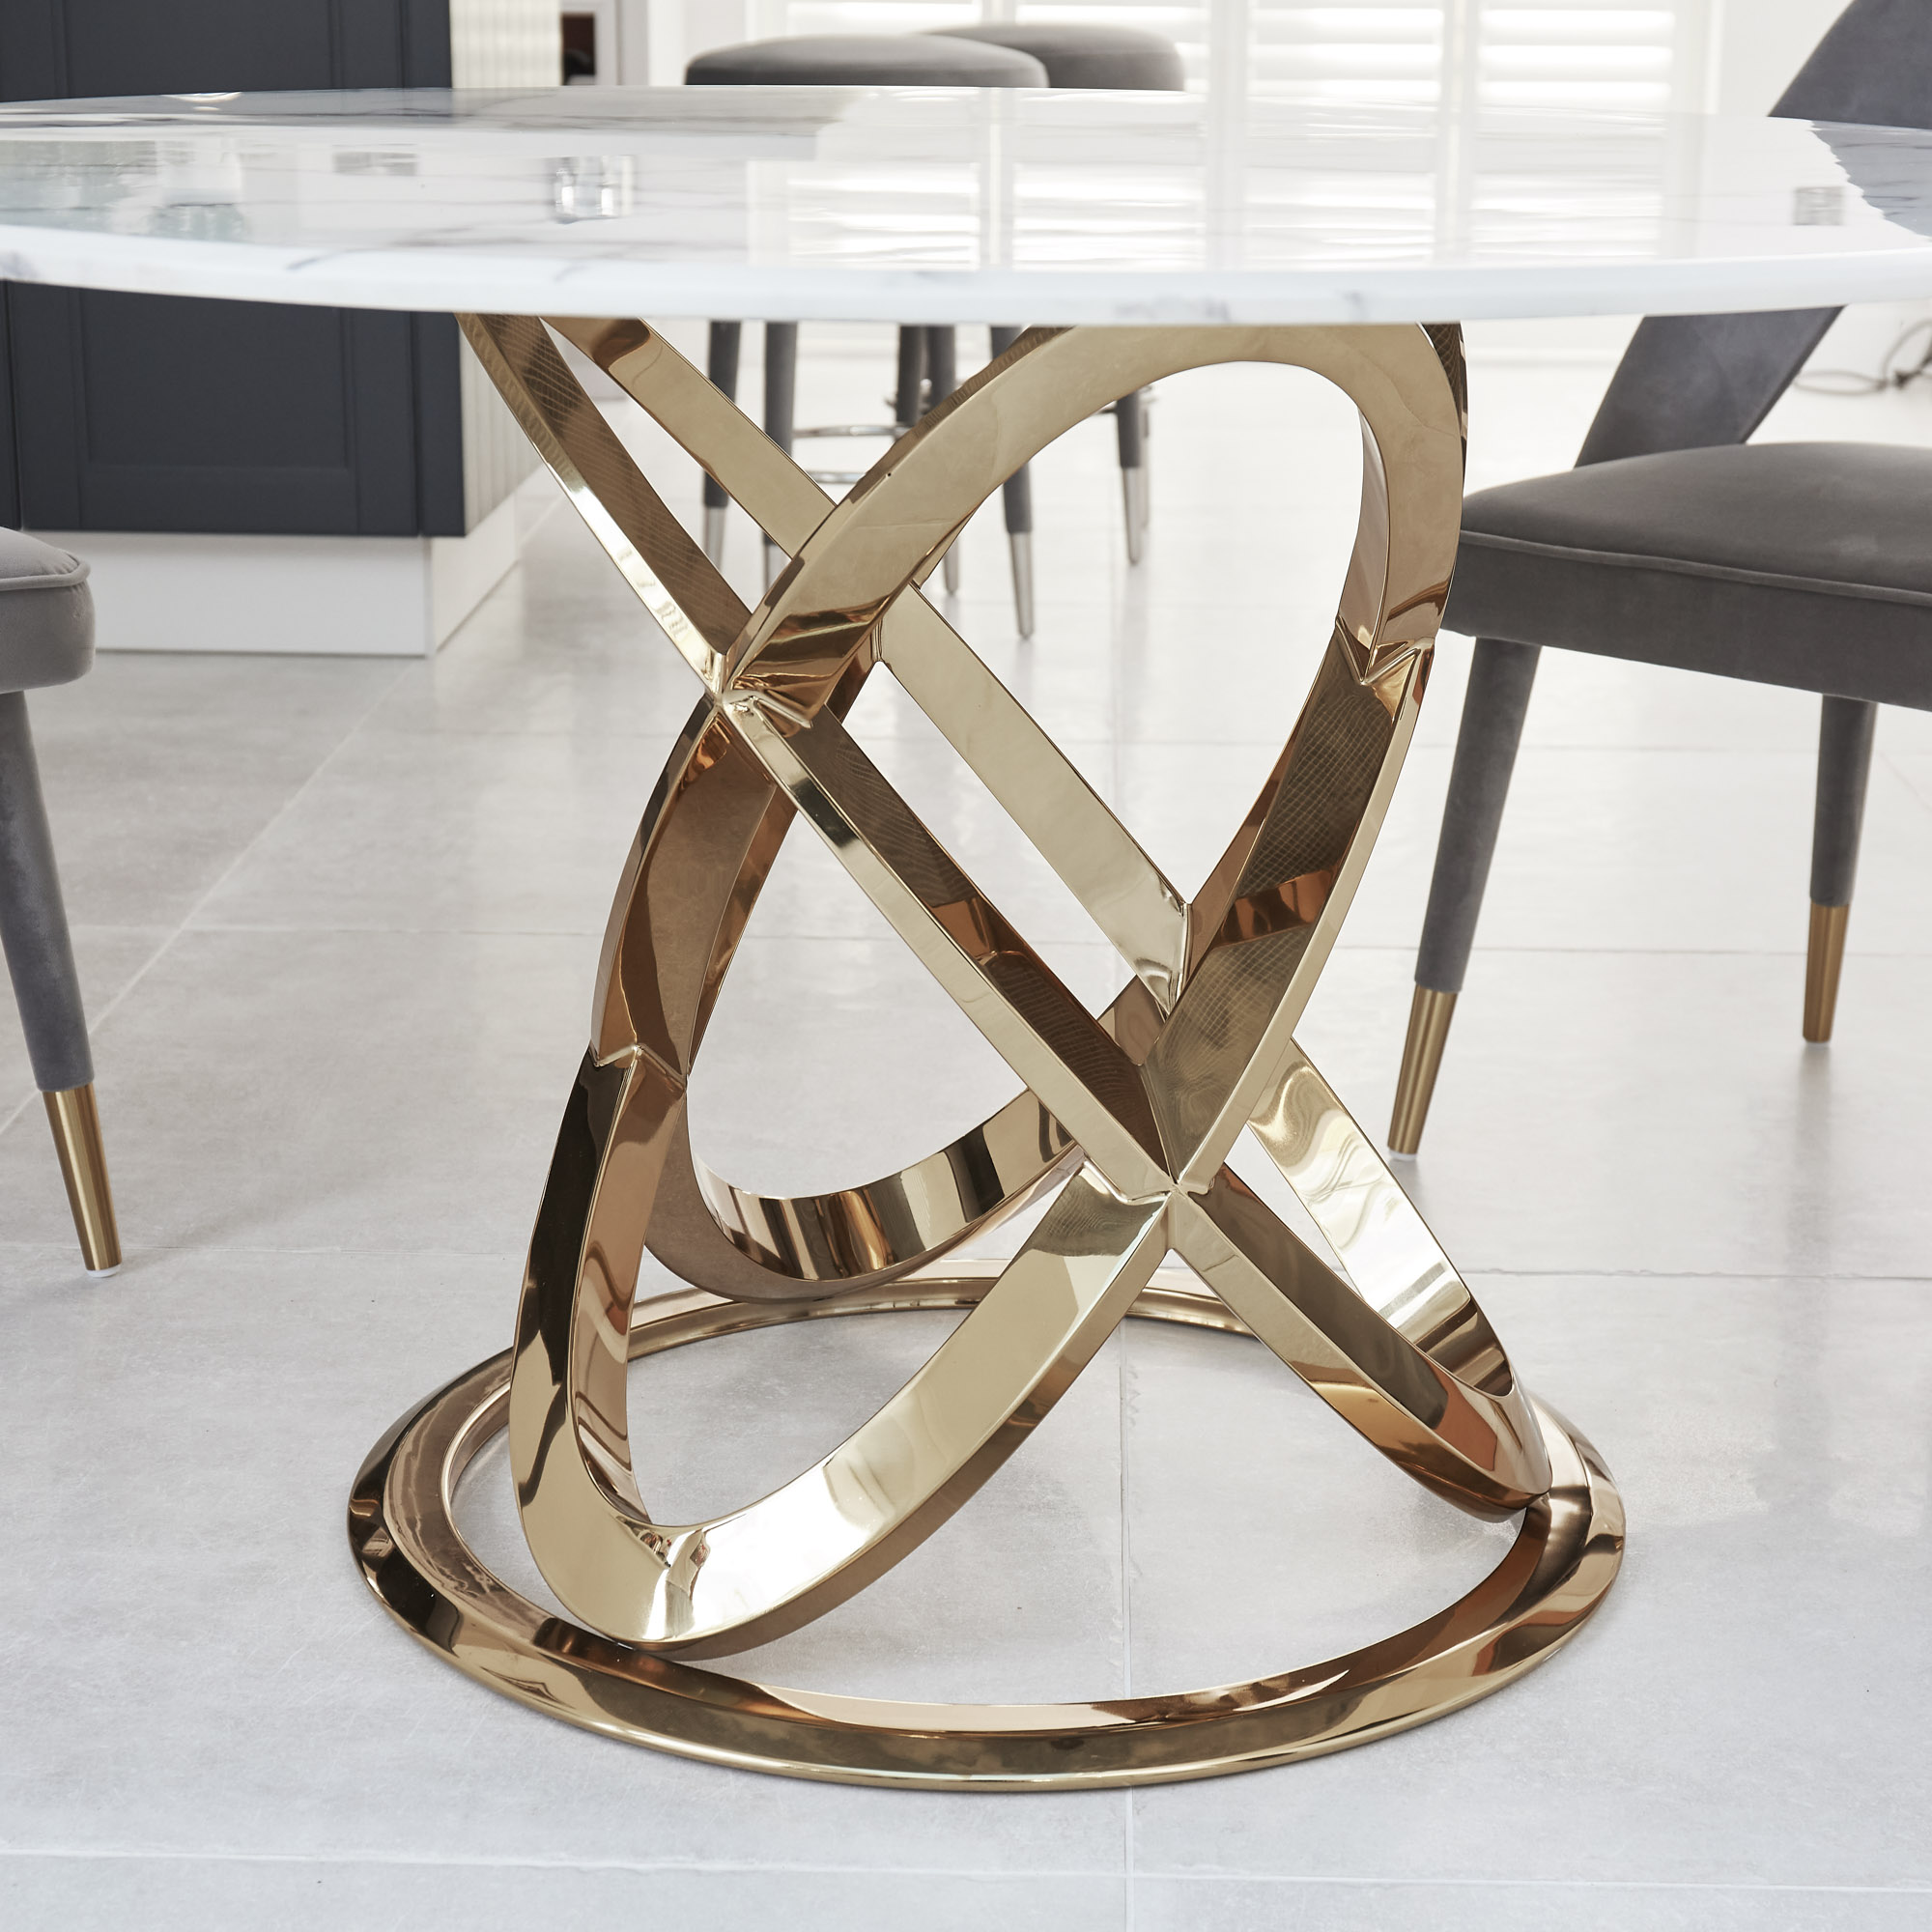 1.3M Pedestal Polished Circular Gold Stainless Steel Dining Table with White Marble Top